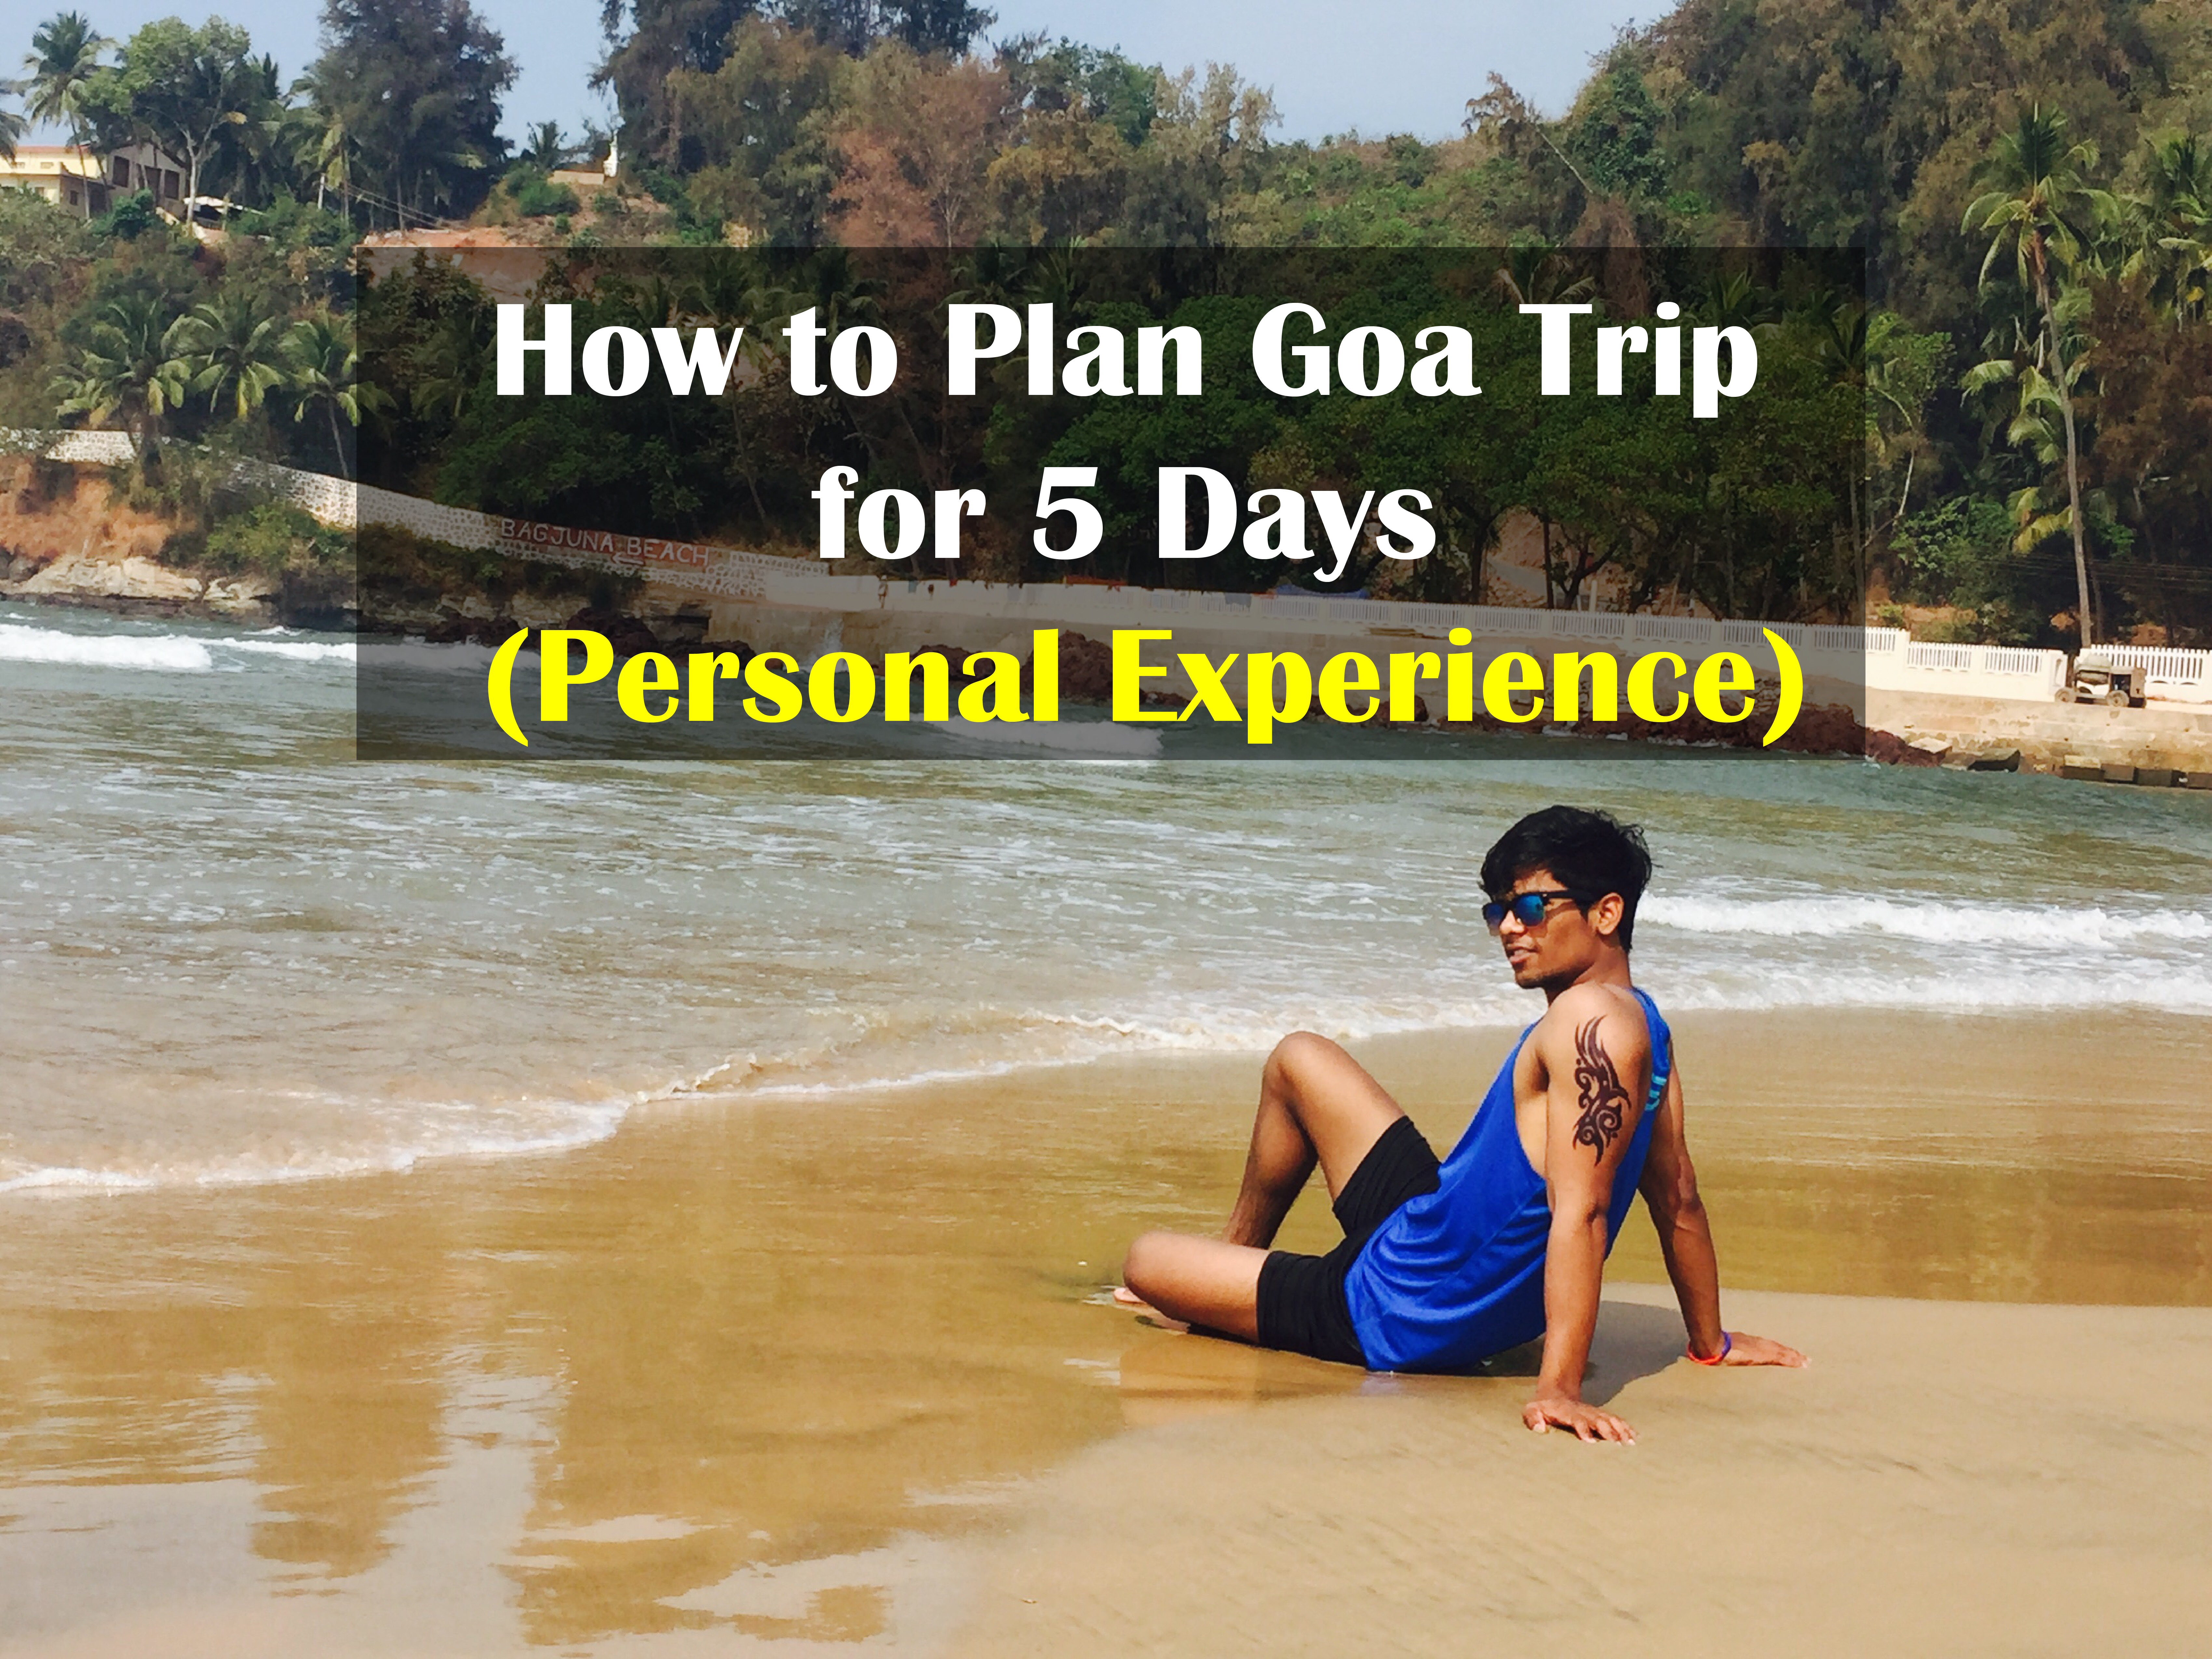 How to Plan Goa Trip for 5 Days